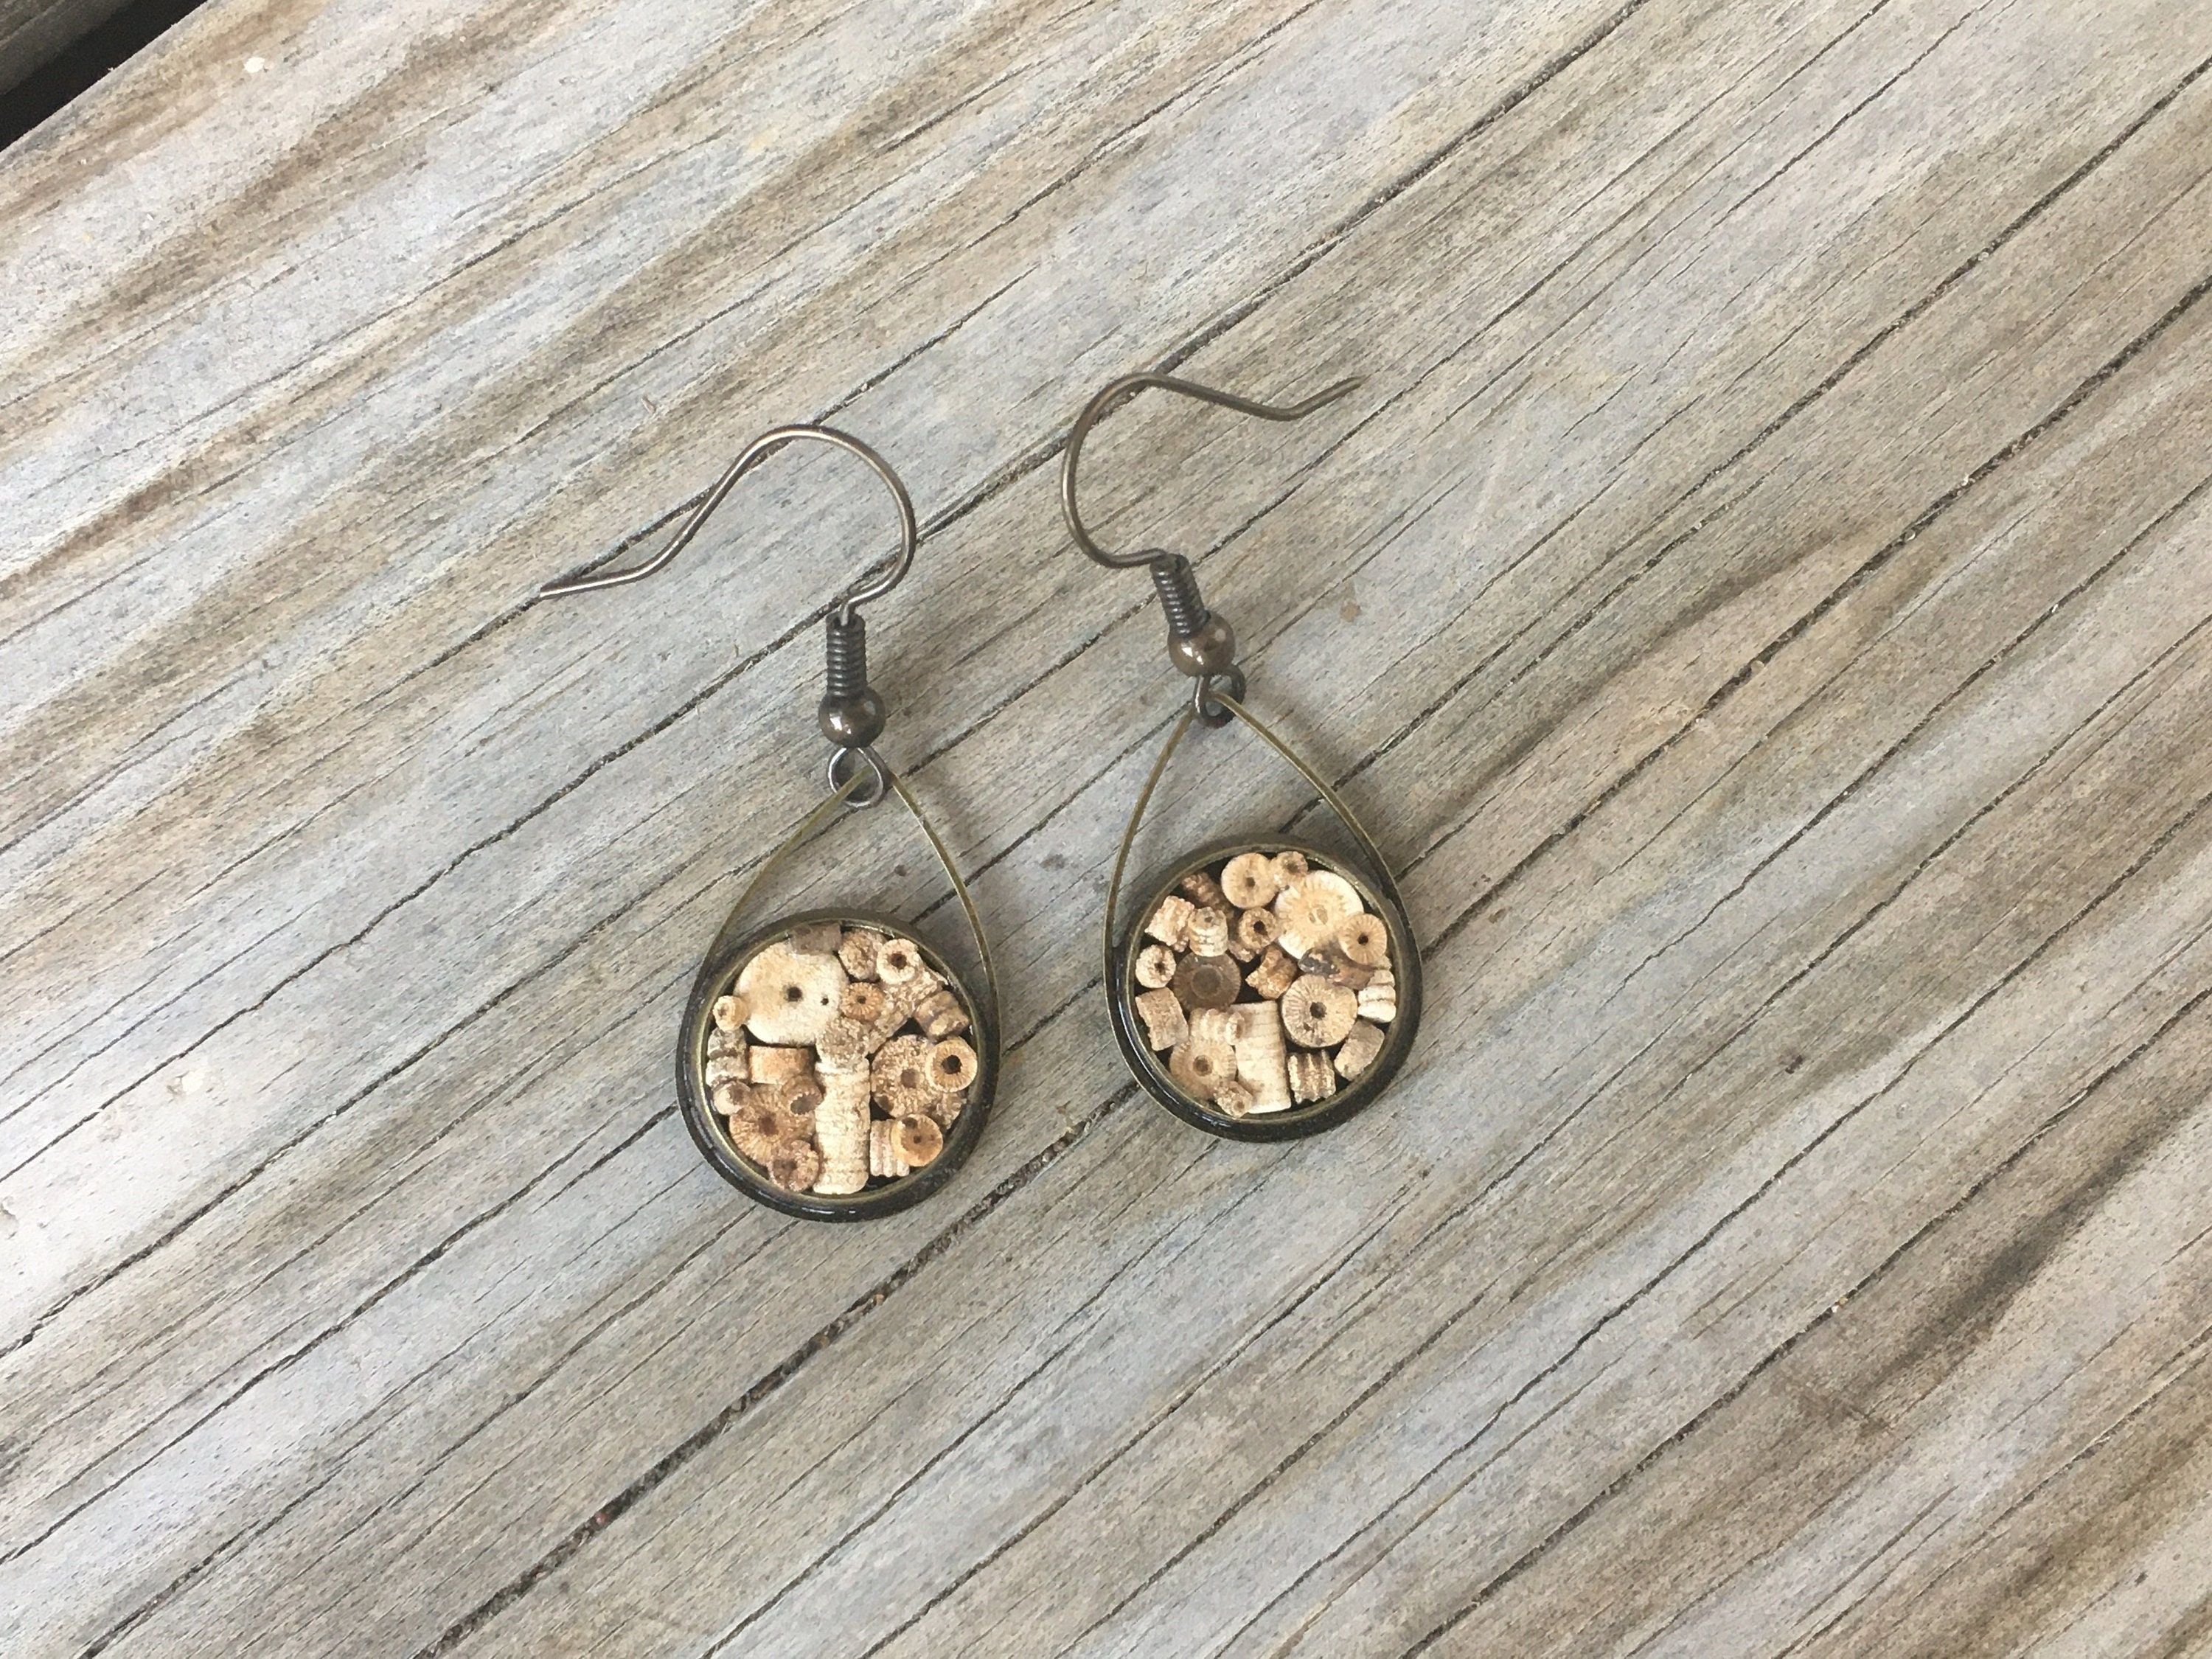 Crinoid fossil Earrings with glass beads Indiana Crinoids